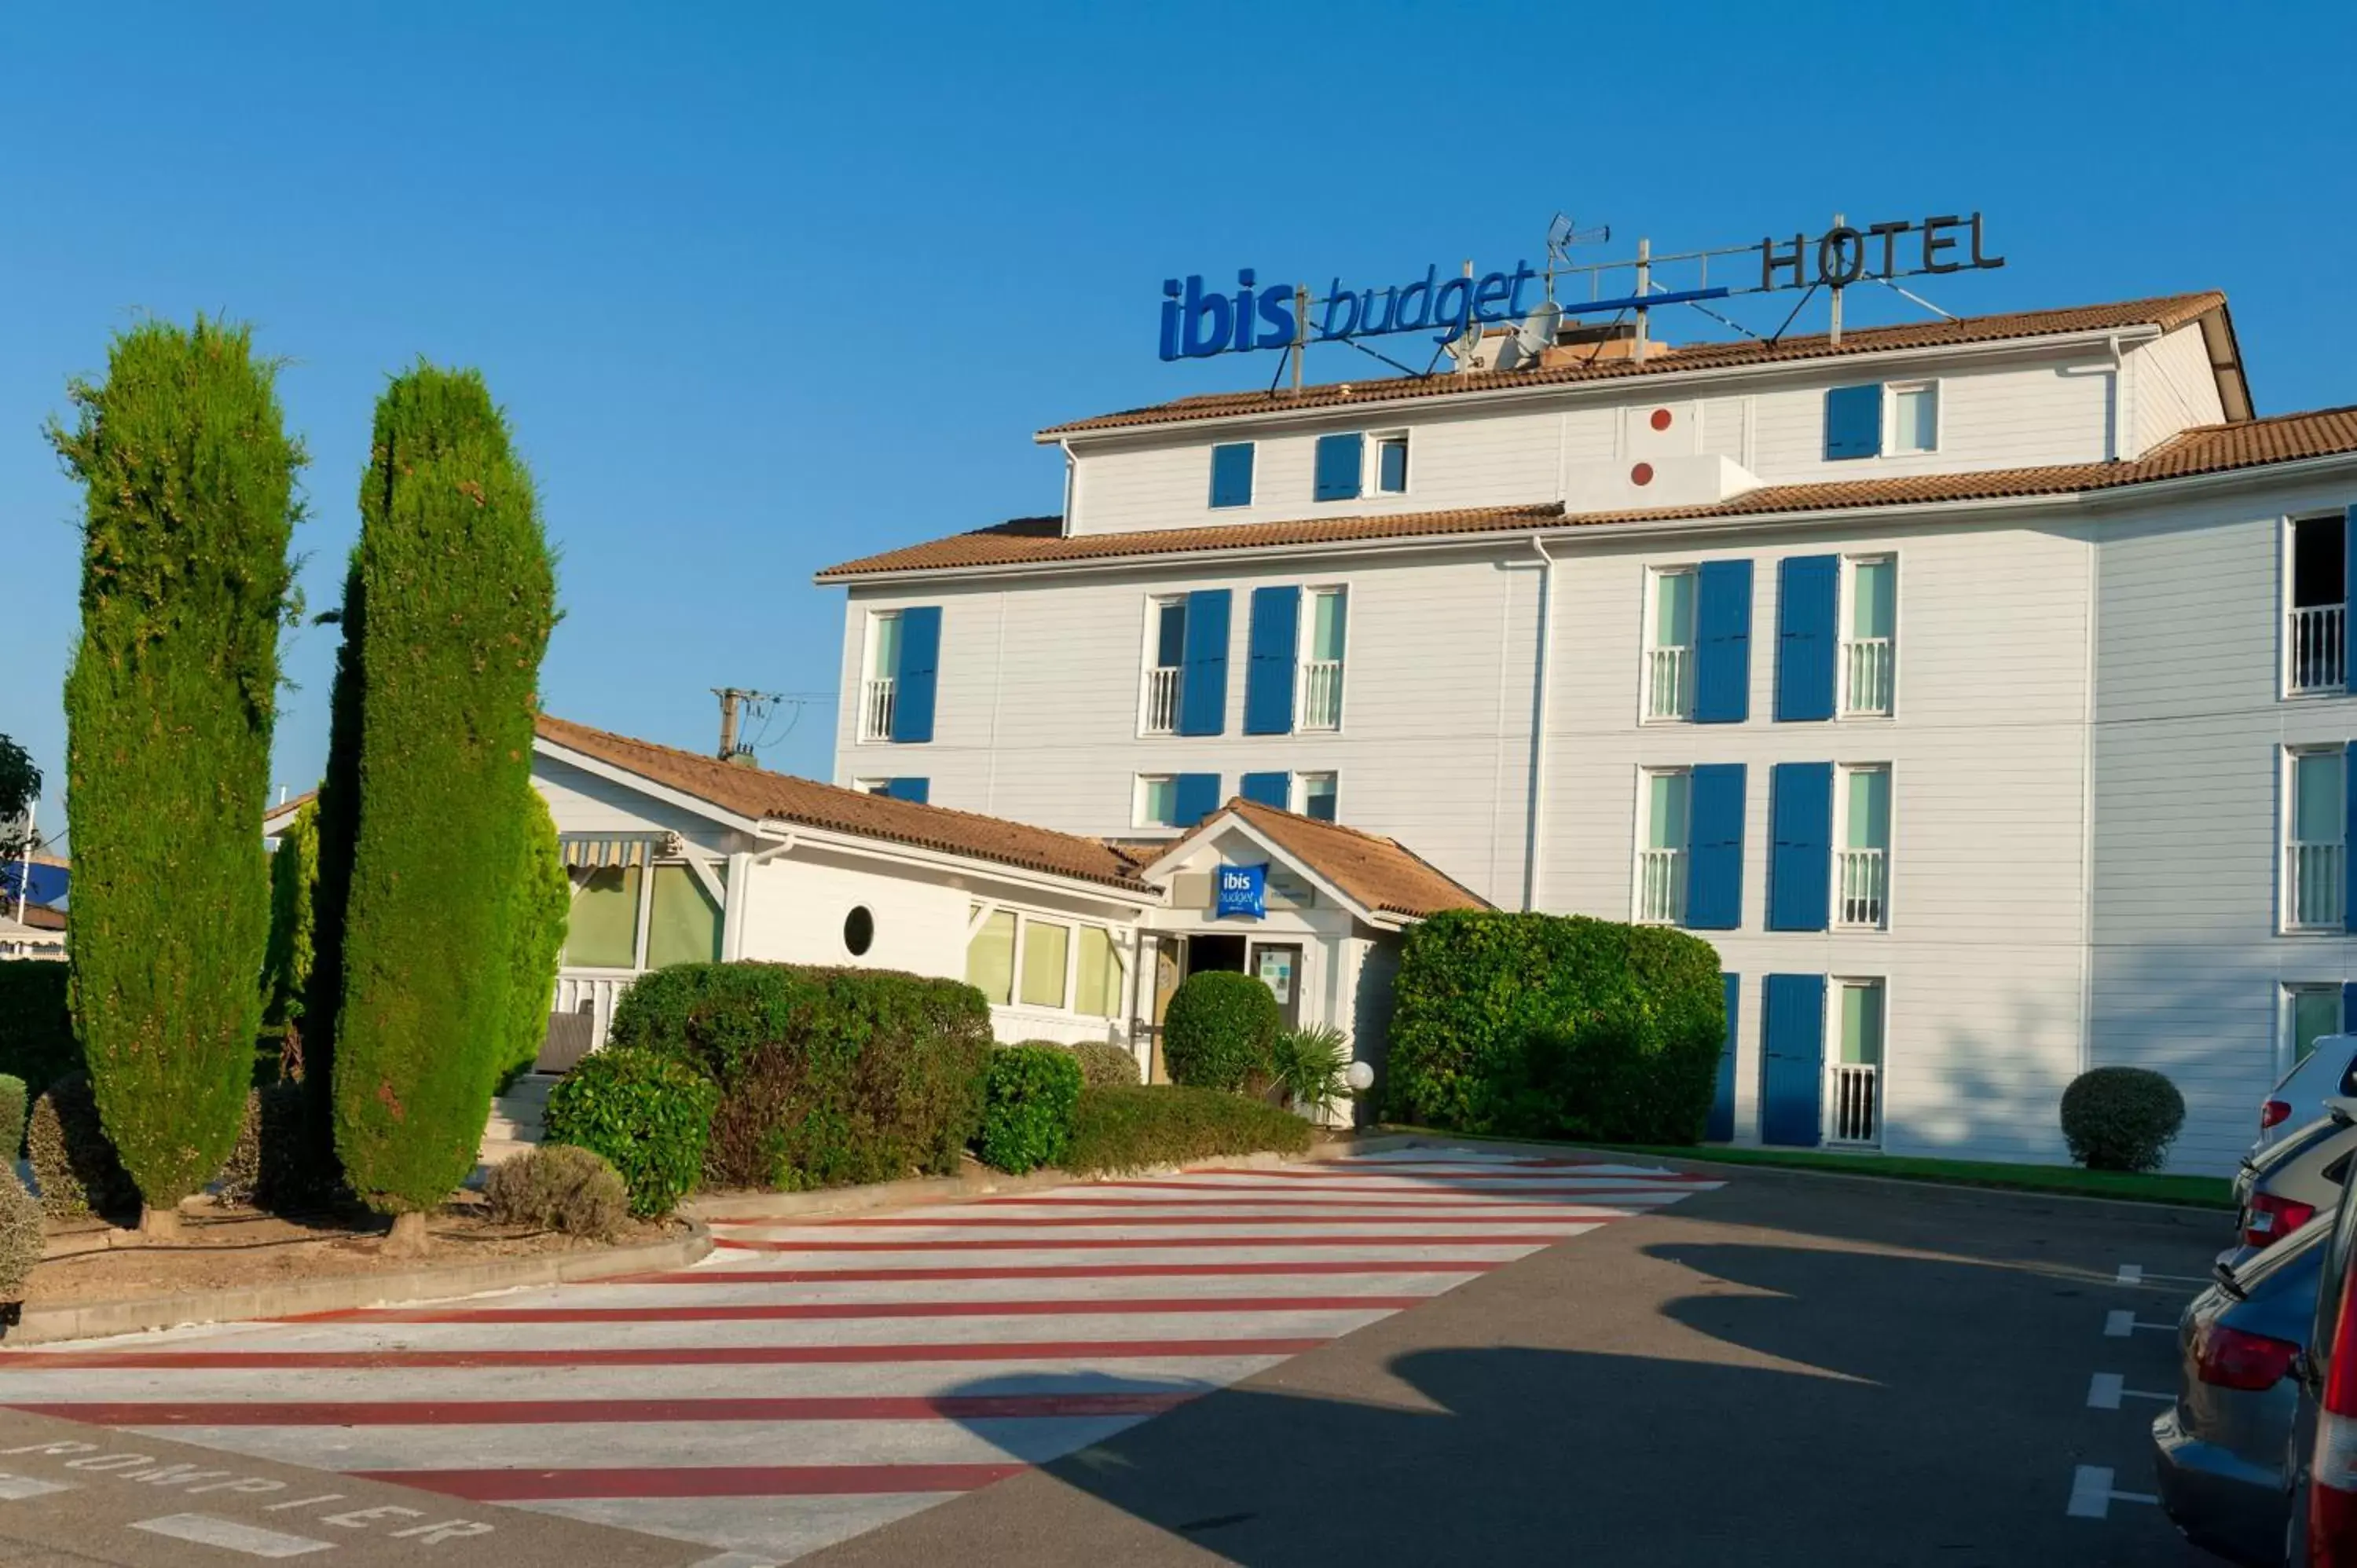 Property Building in ibis budget Nimes Marguerittes - A9